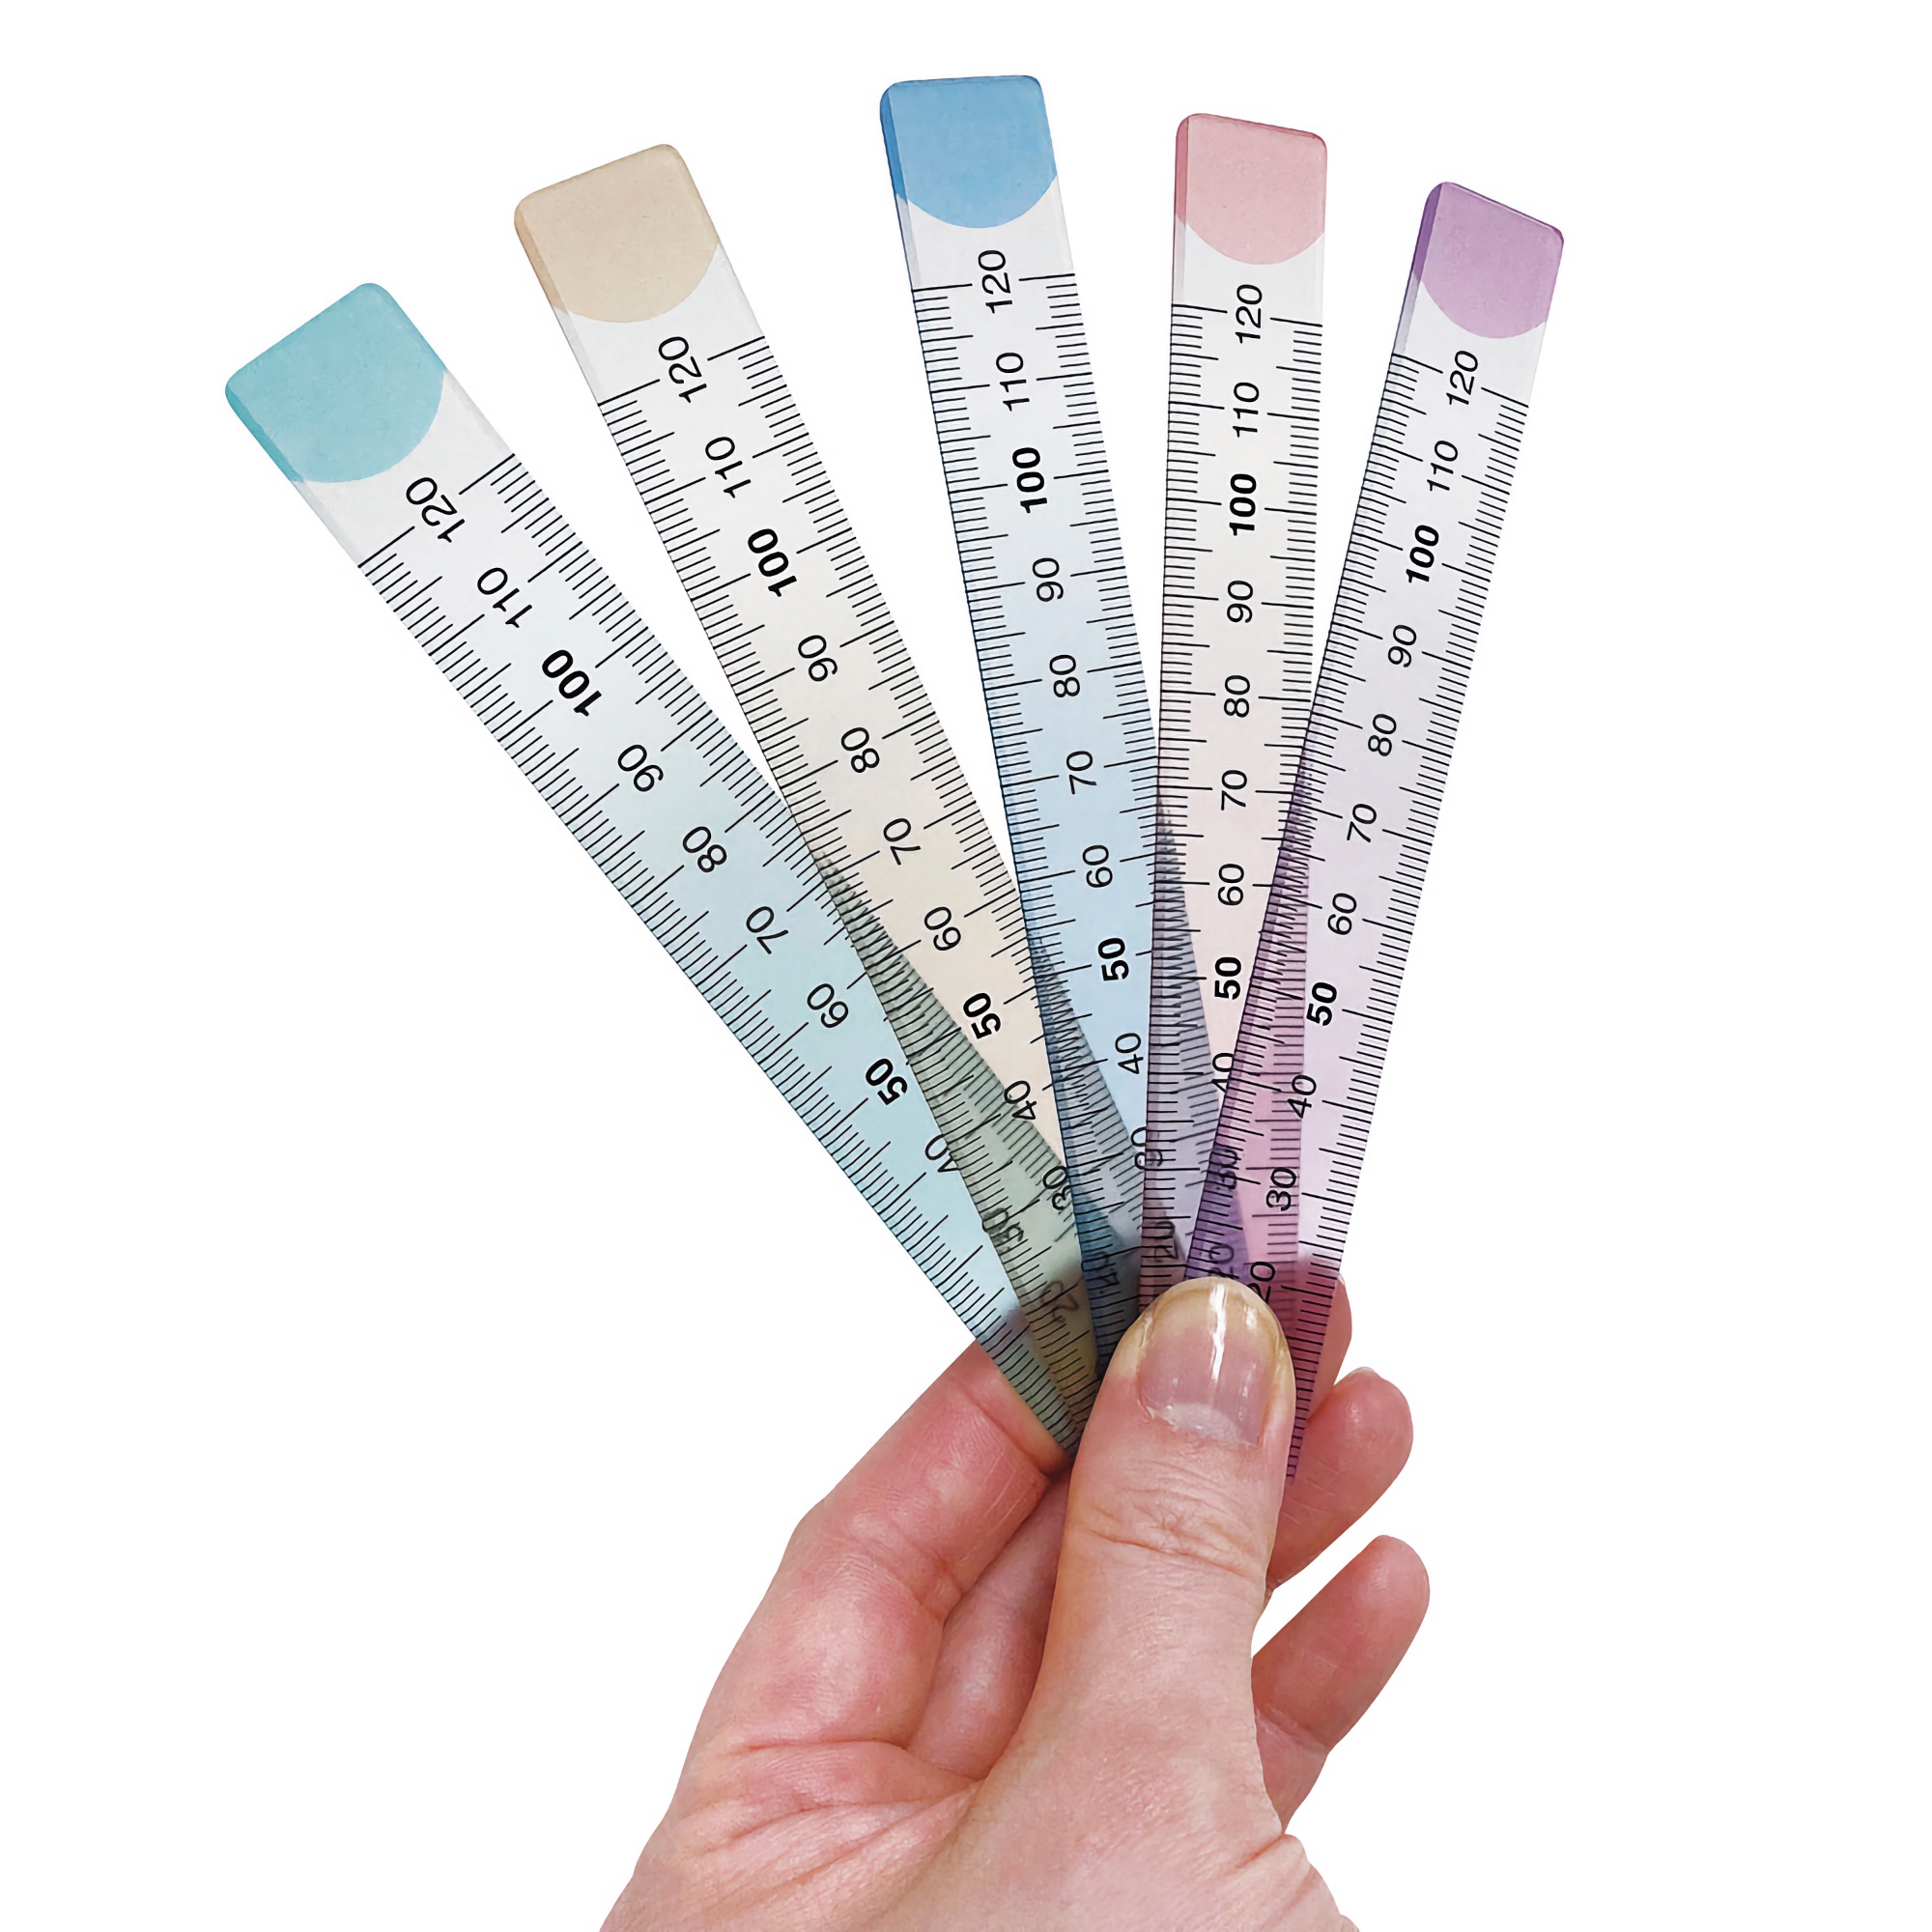 Kyoei Orions Nuance Color Ruler 12 cm Butterfly Pea